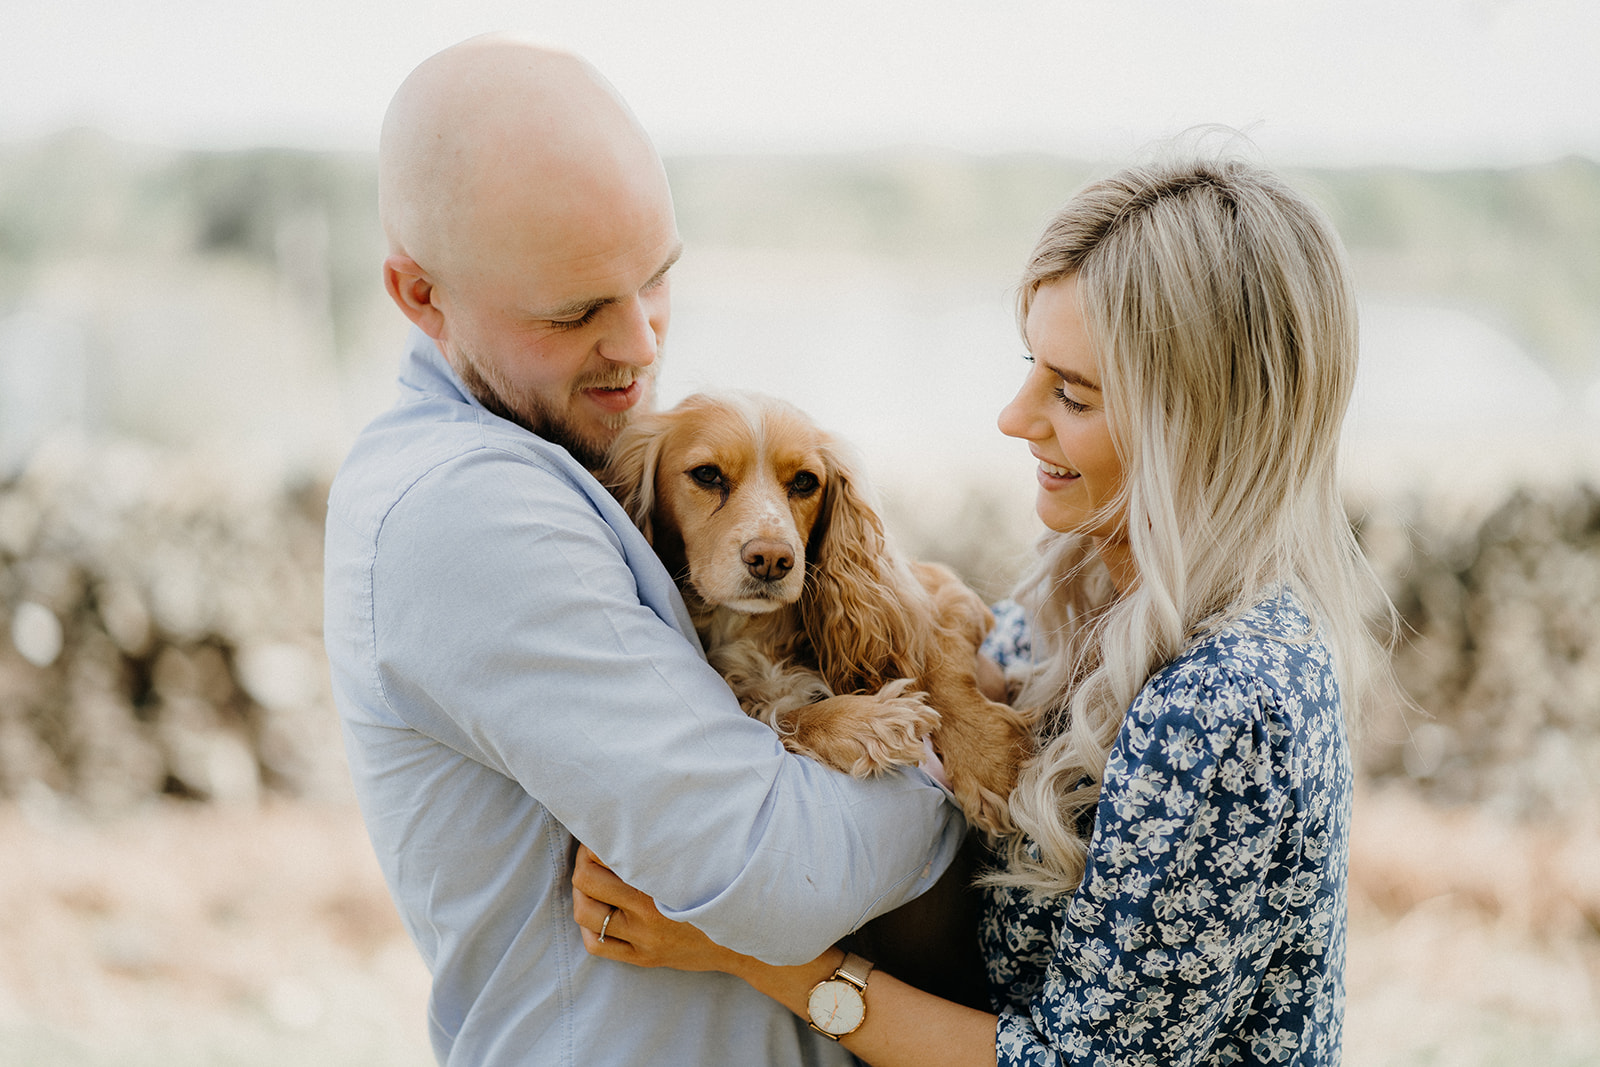 Couple with their cocker spaniel dog, having a cuddle.